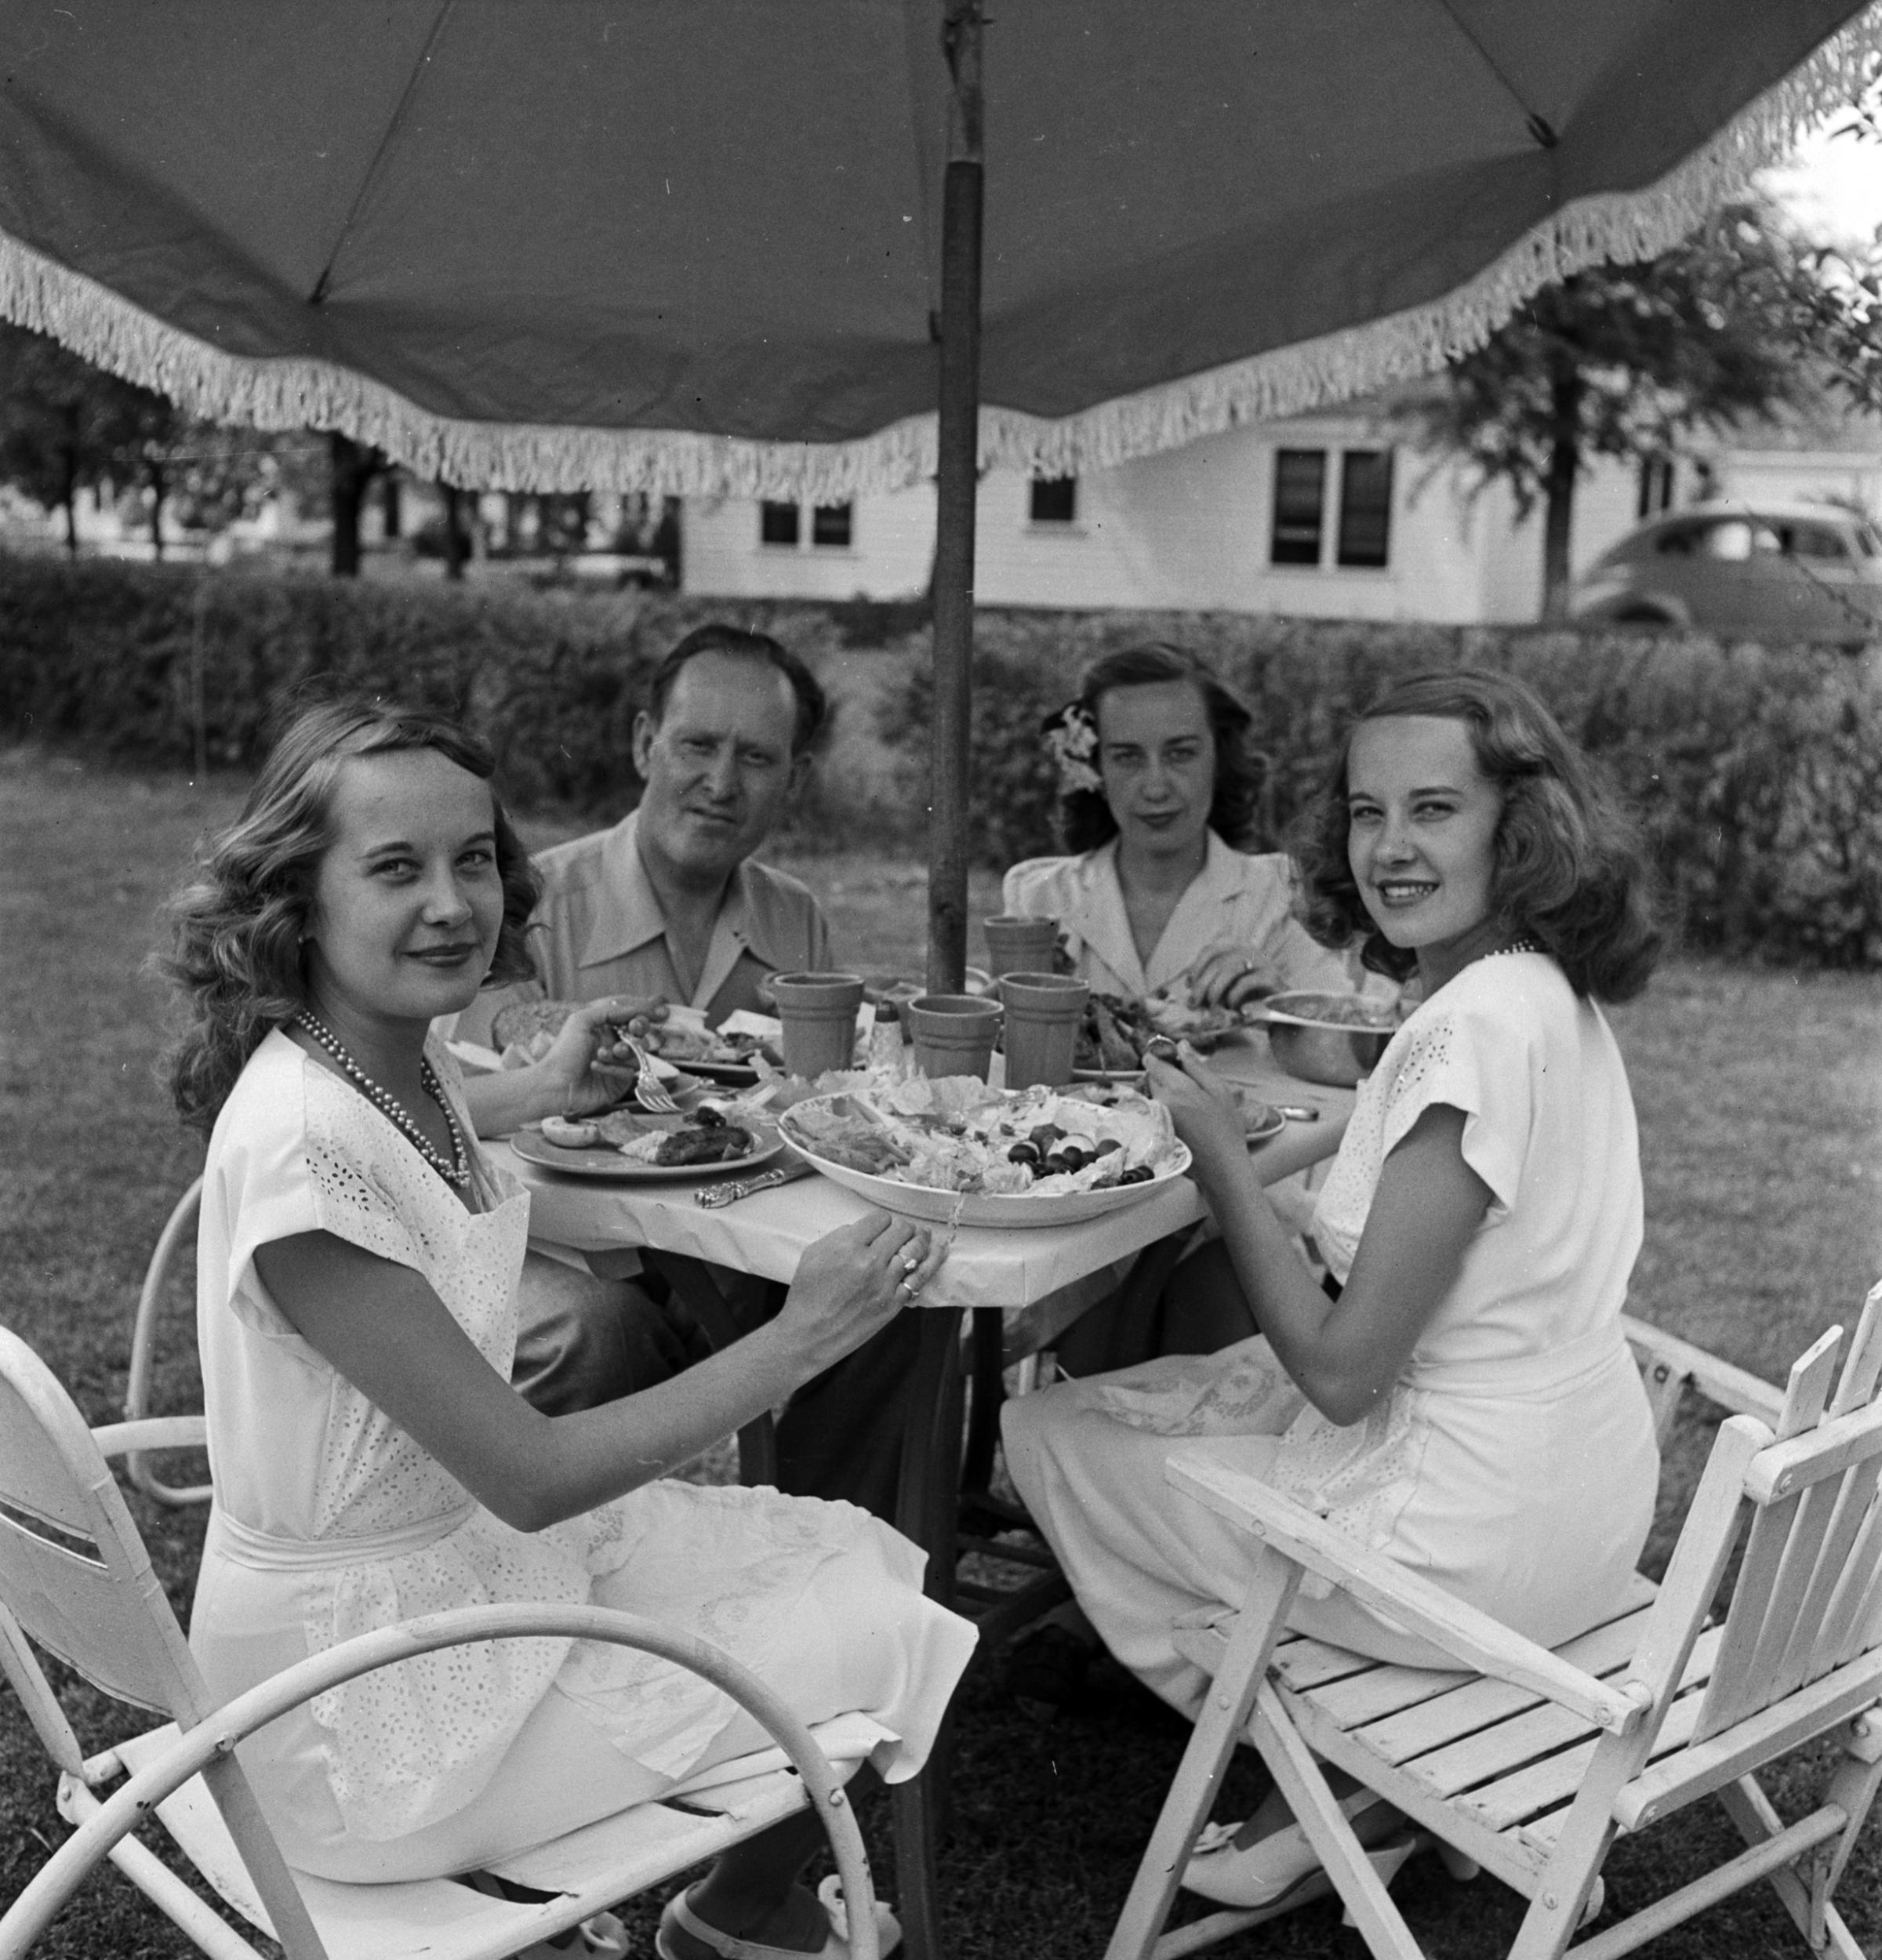 Twins, Betty and Barbara Bounds with their parents, in Tulsa, Oklahoma.